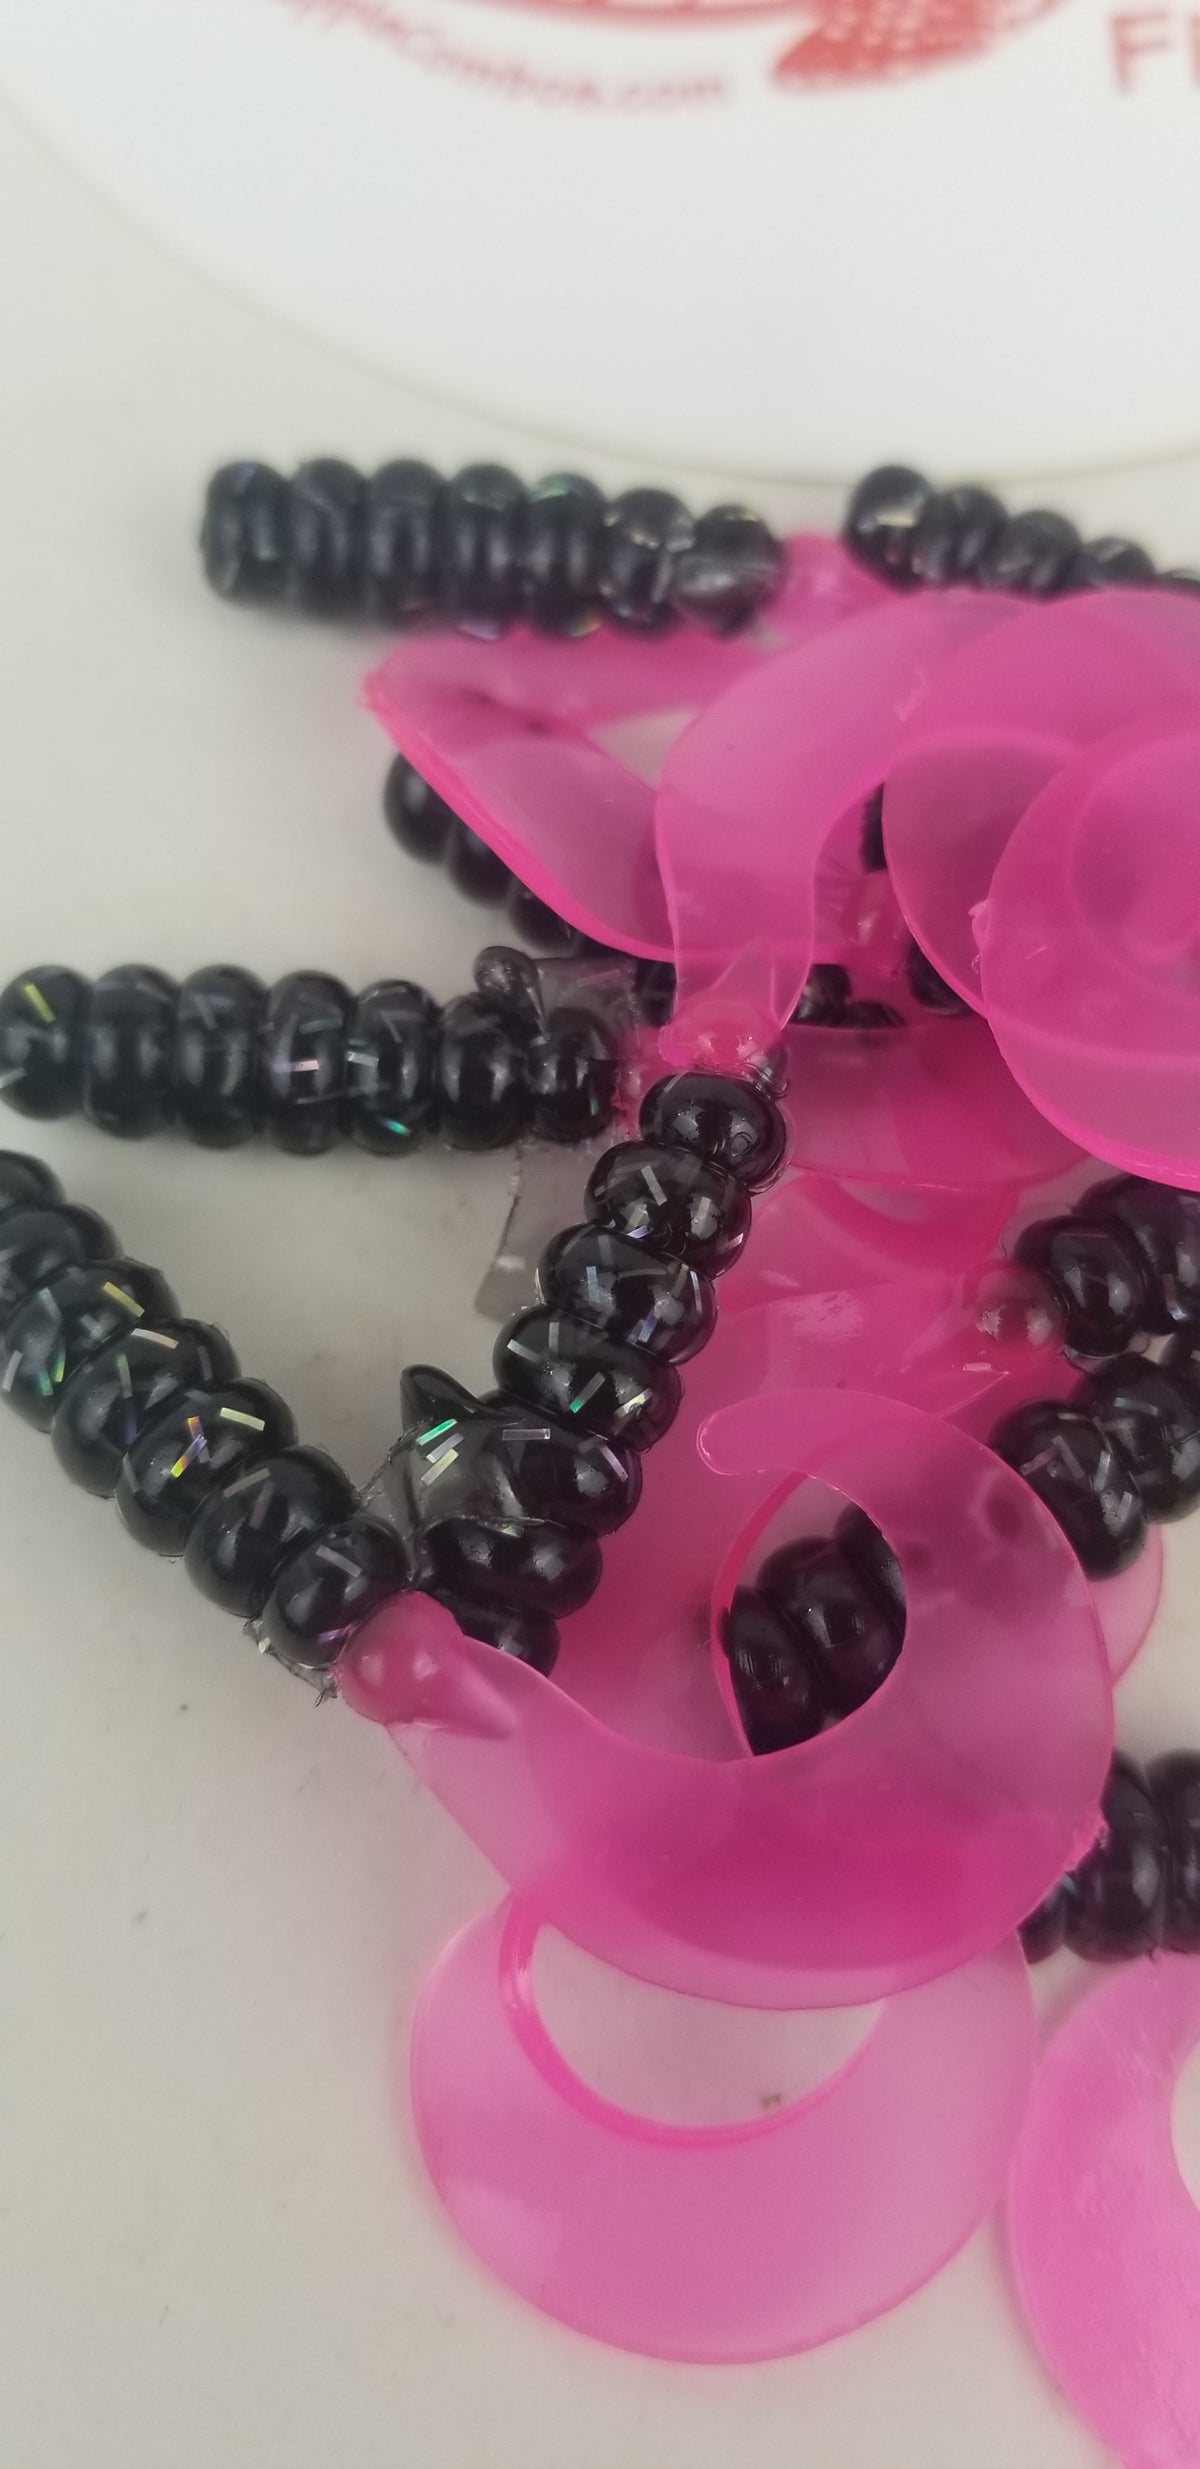 Cam's 2" BLACK BLAZE (HOLOGRAM FLAKE)  Curly Tail Grub 40pc  Crappie Soft Jigs  [A Cam's Exclusive]